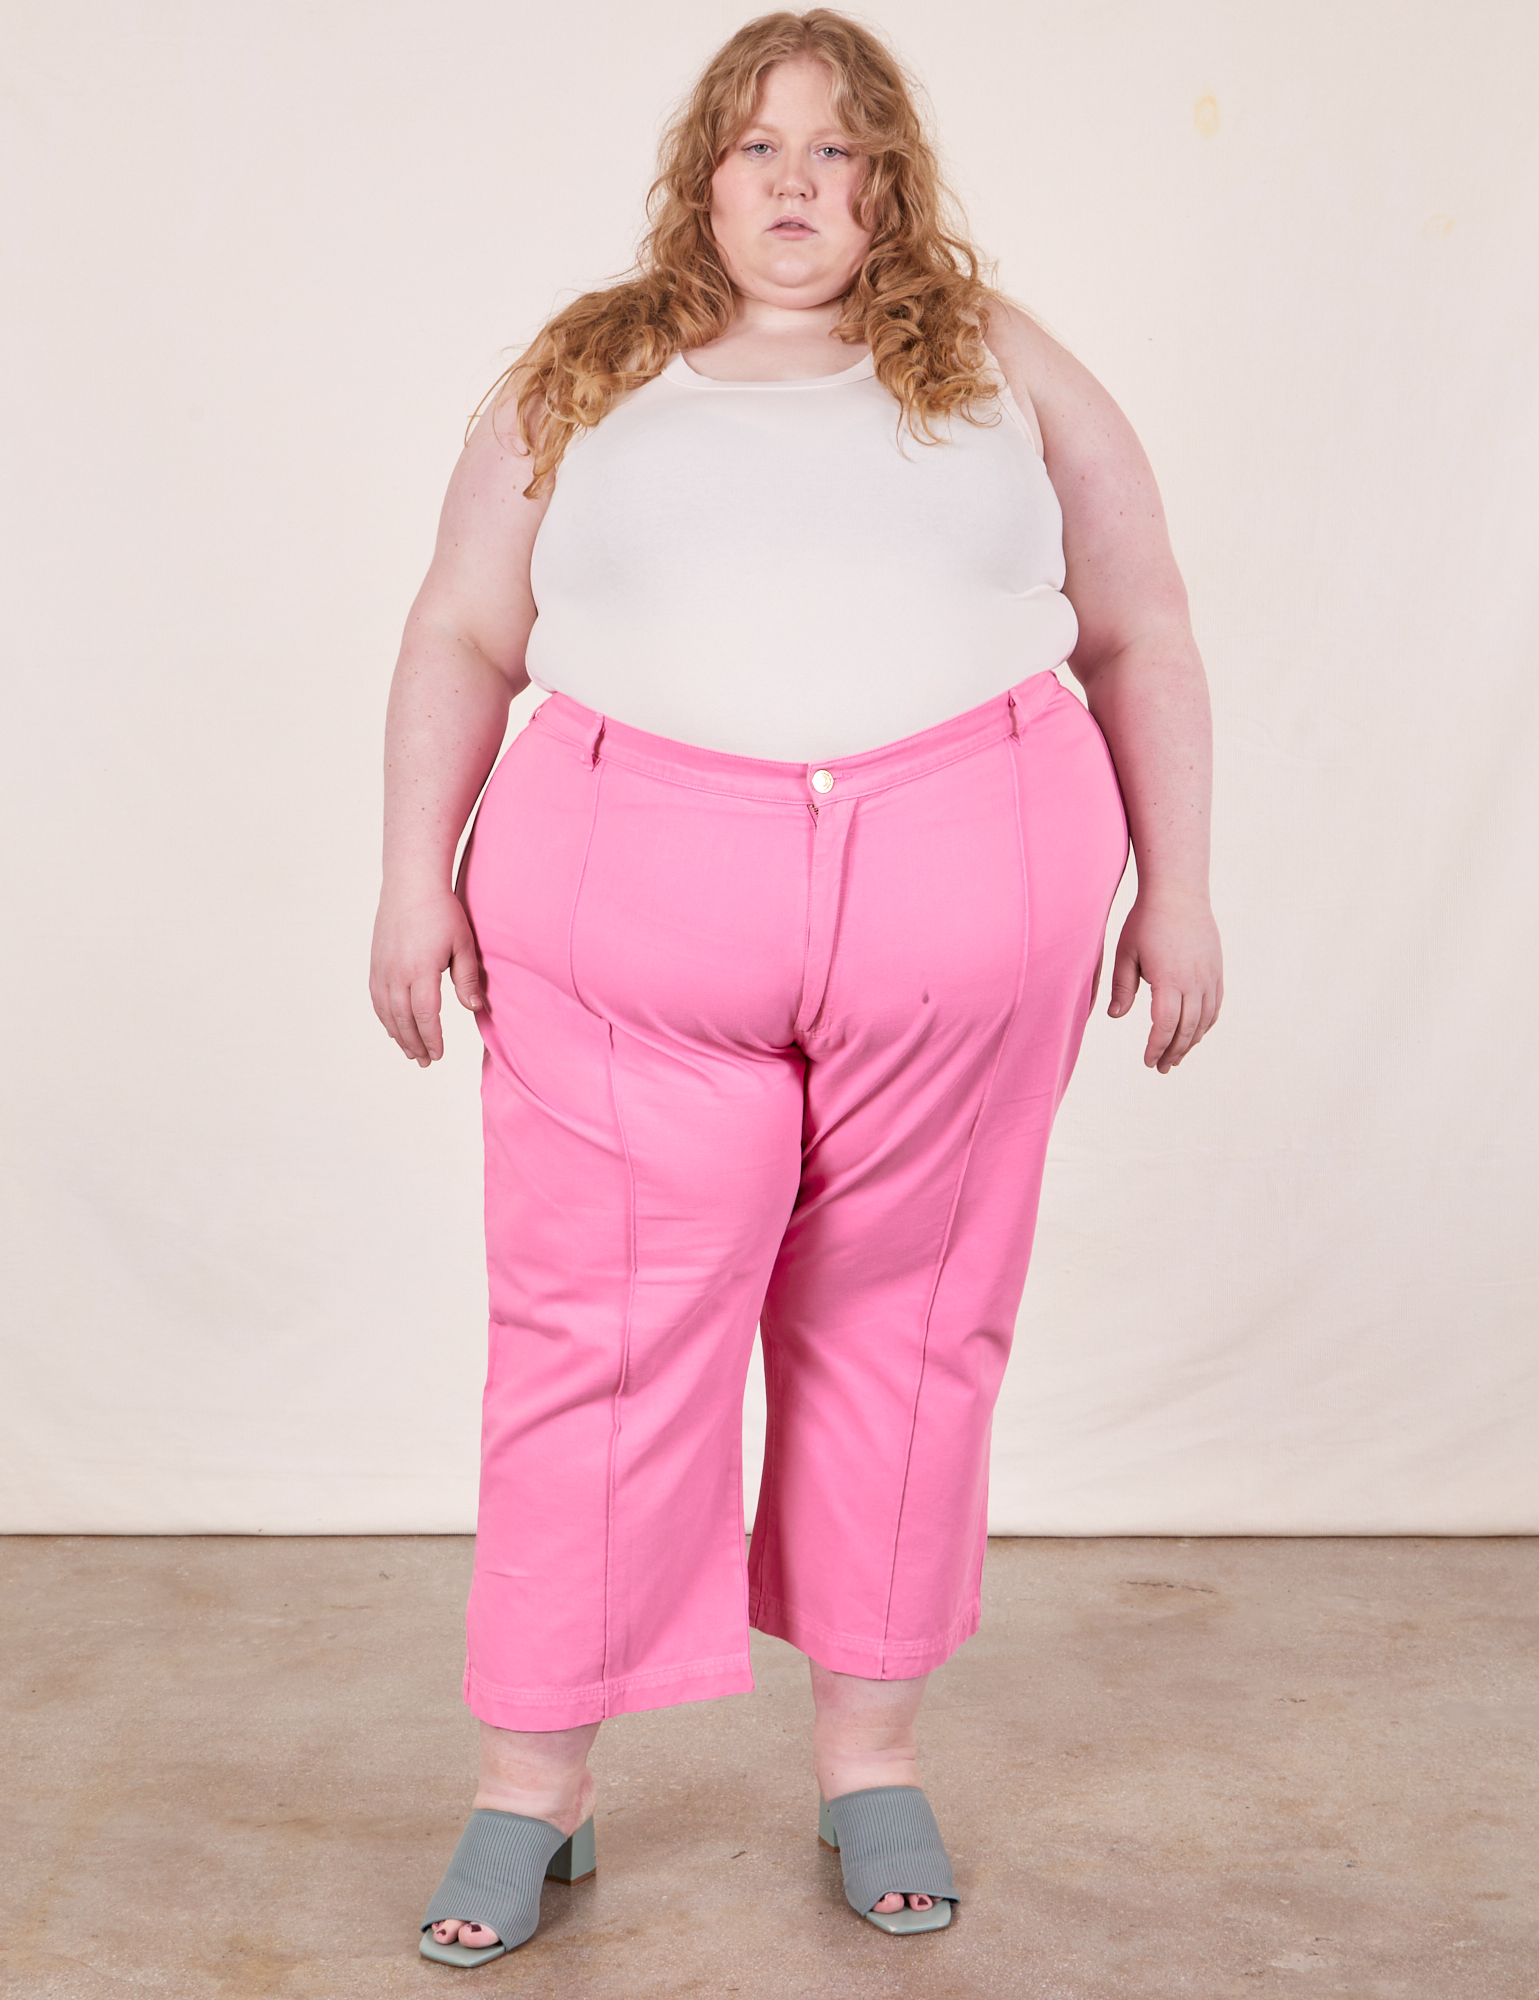 Catie is 5&#39;11&quot; and wearing size 5XL Western Pants in Bubblegum Pink paired with vintage off-white Tank Top